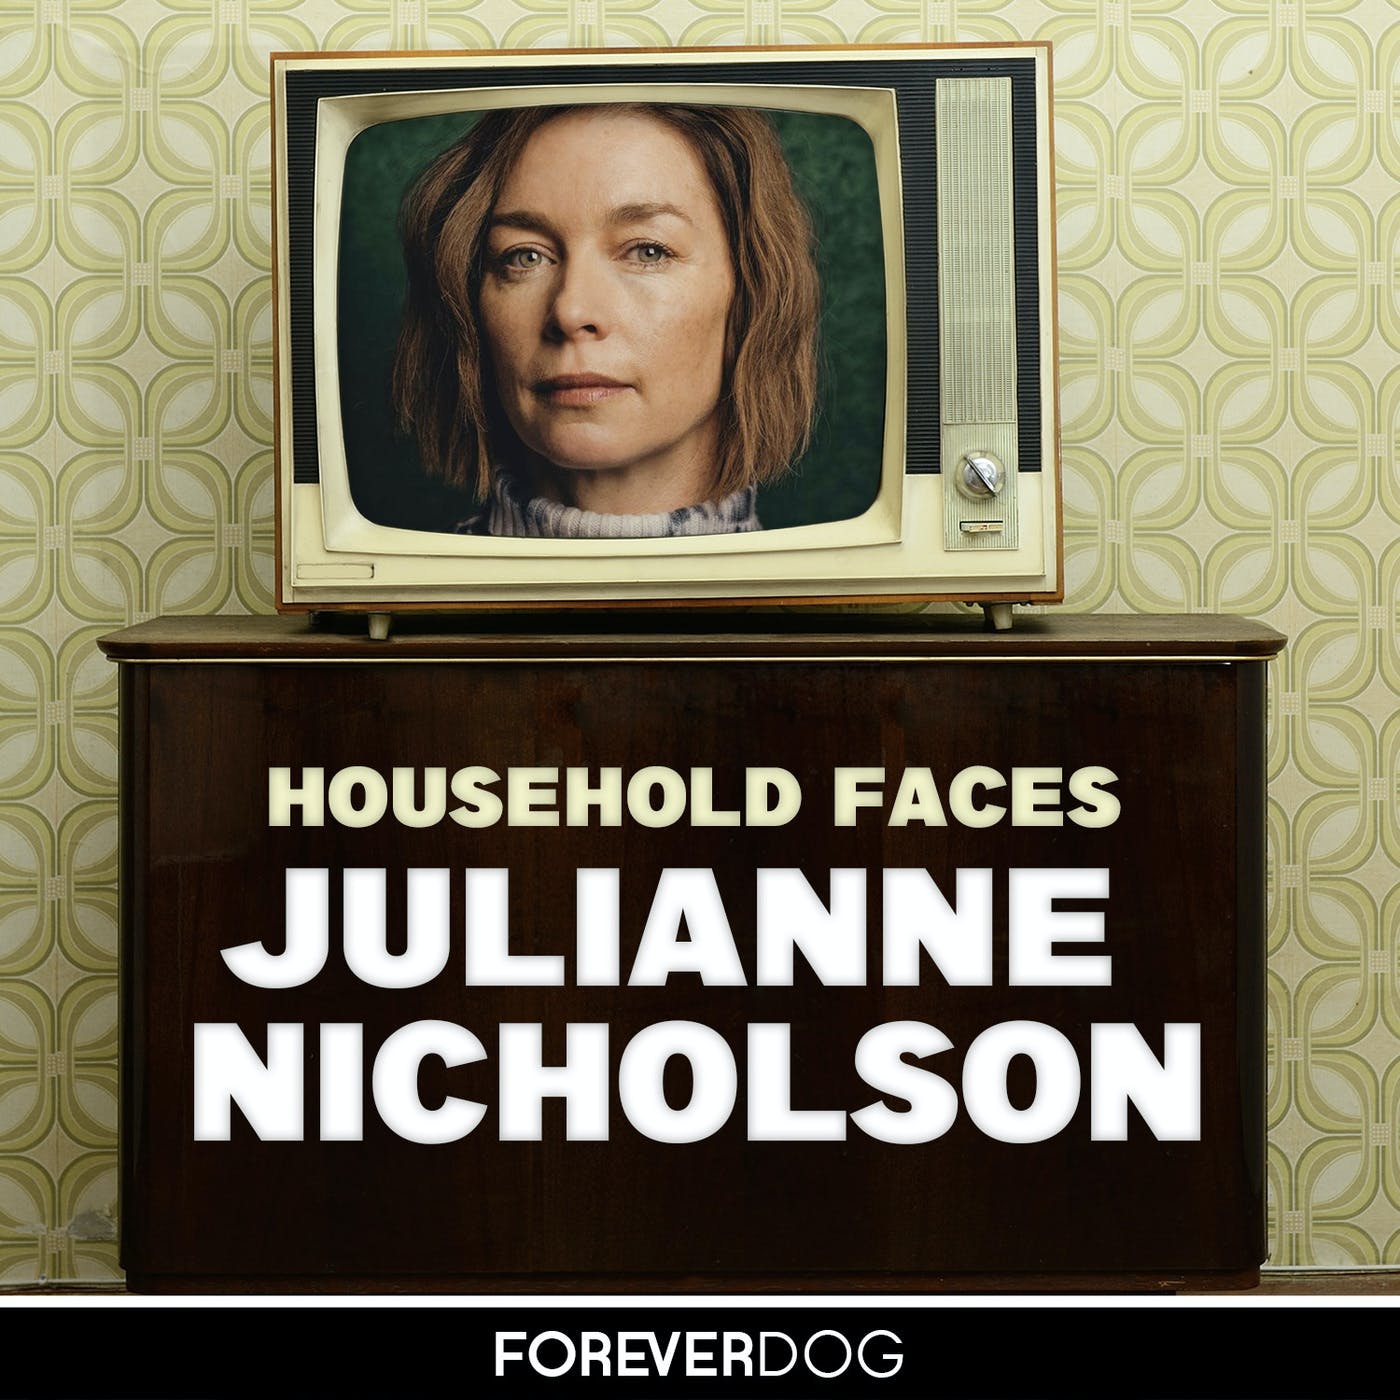 Julianne Nicholson (Mare of Easttown, The Outsider, Black Mass)